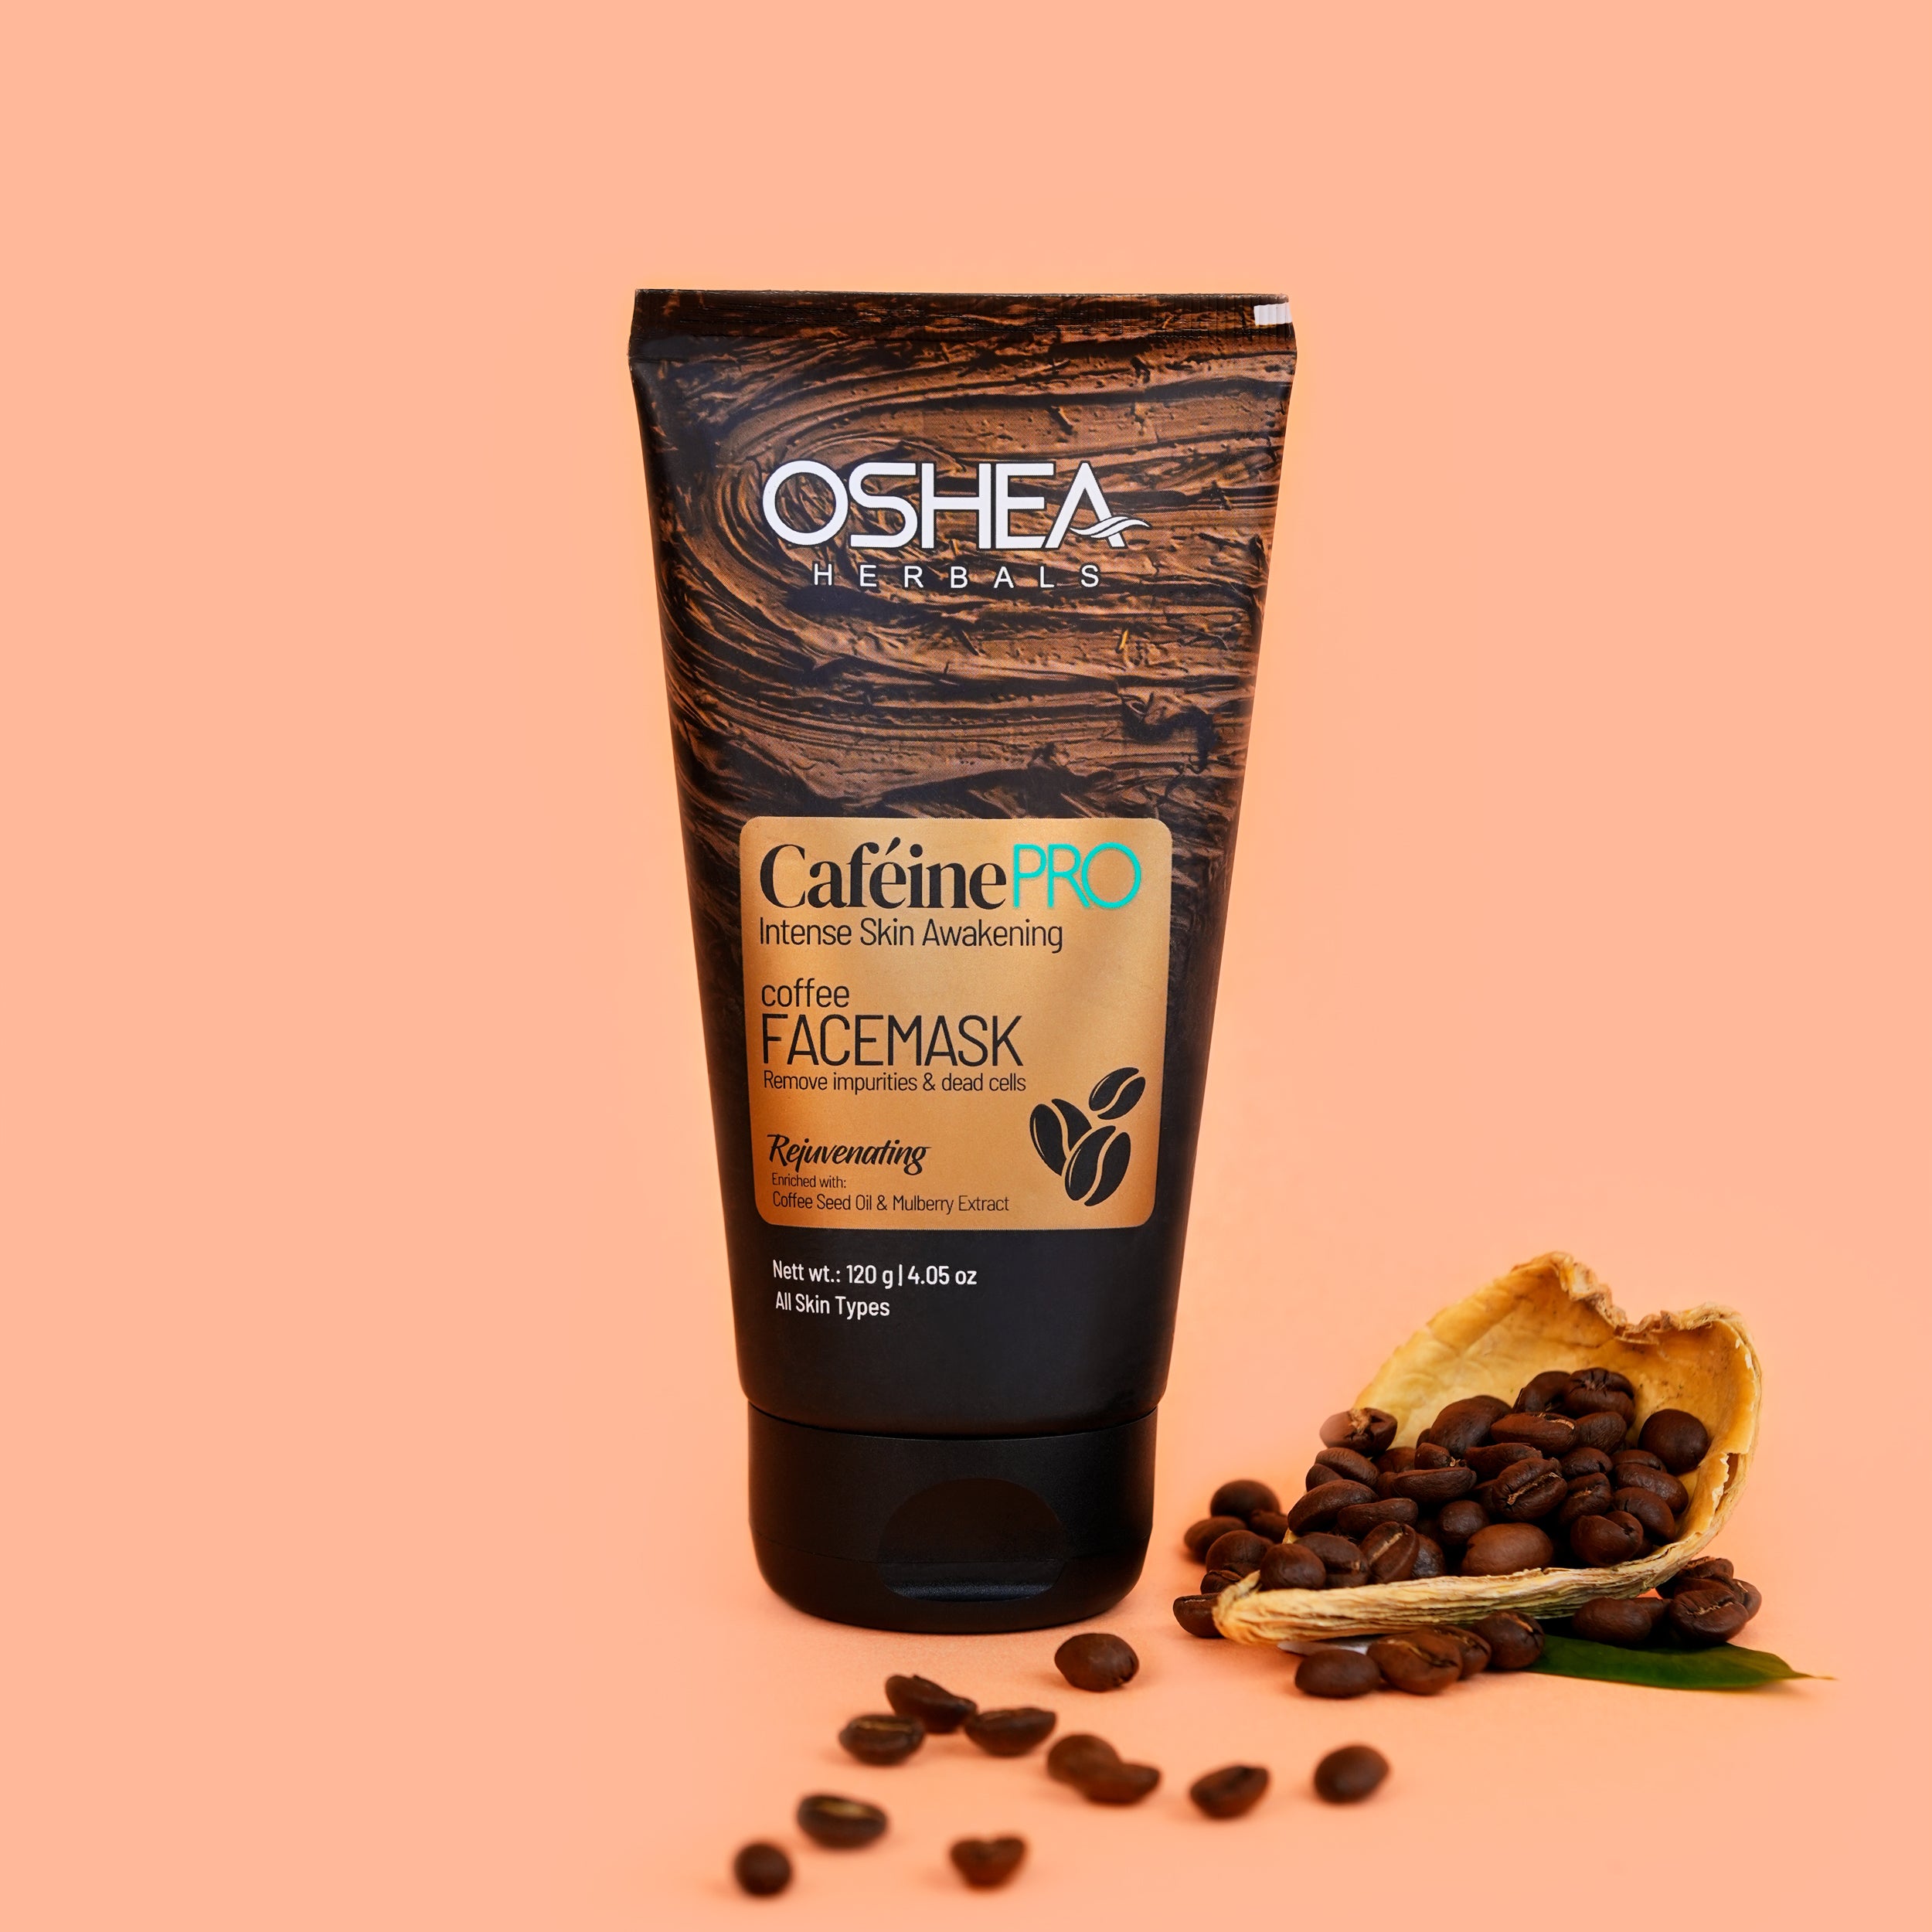 Cafeine-Pro Face Mask Oshea Herbals